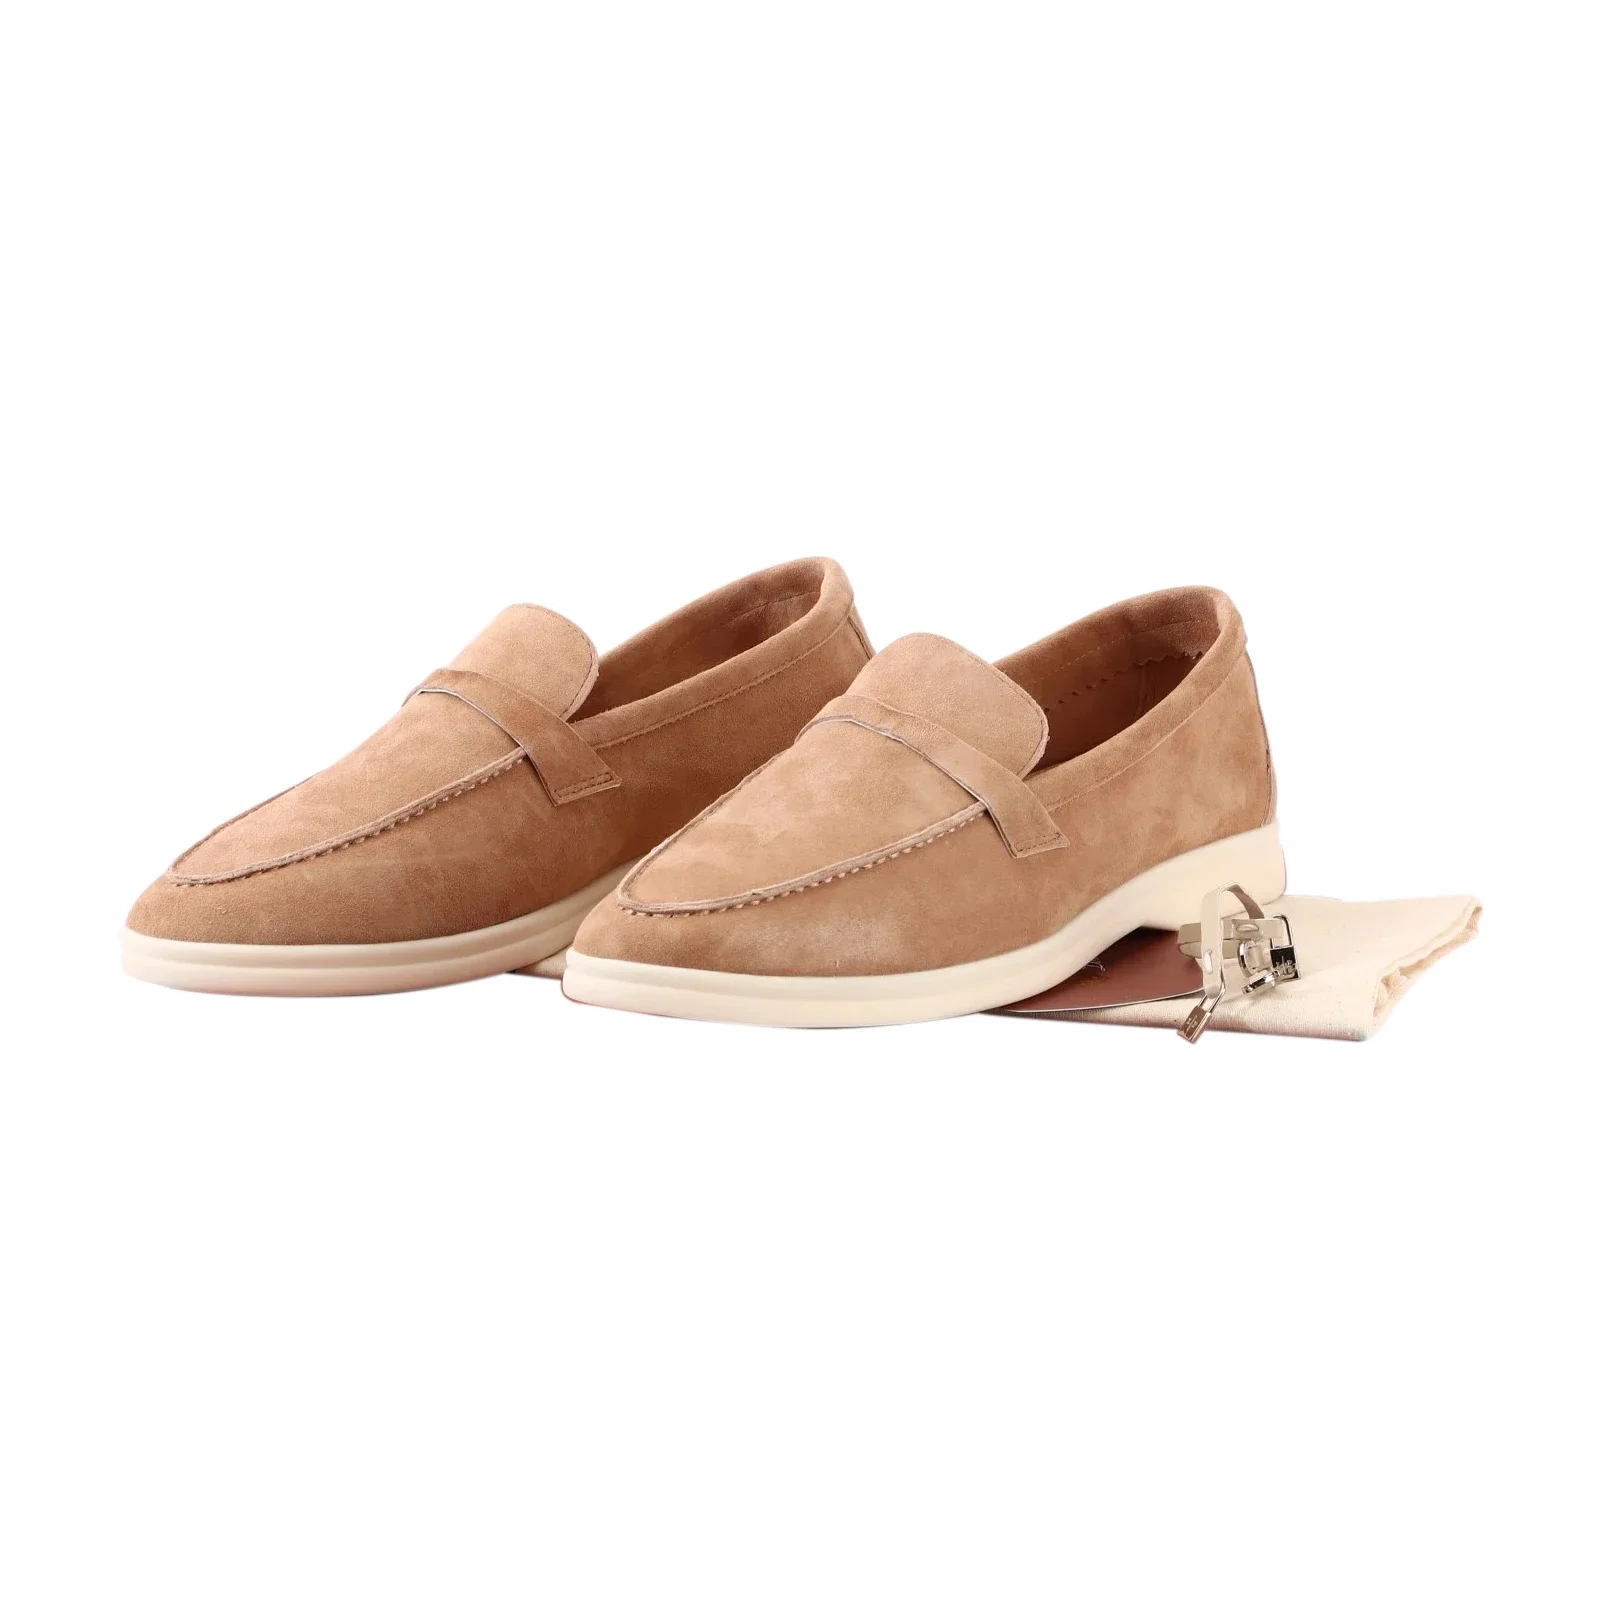 

Women Suede Loafers Shoes Spring Autumn Fashion Causal Moccasin Leather Metal Pendant Flat Lazy Slipon Mules Shoes